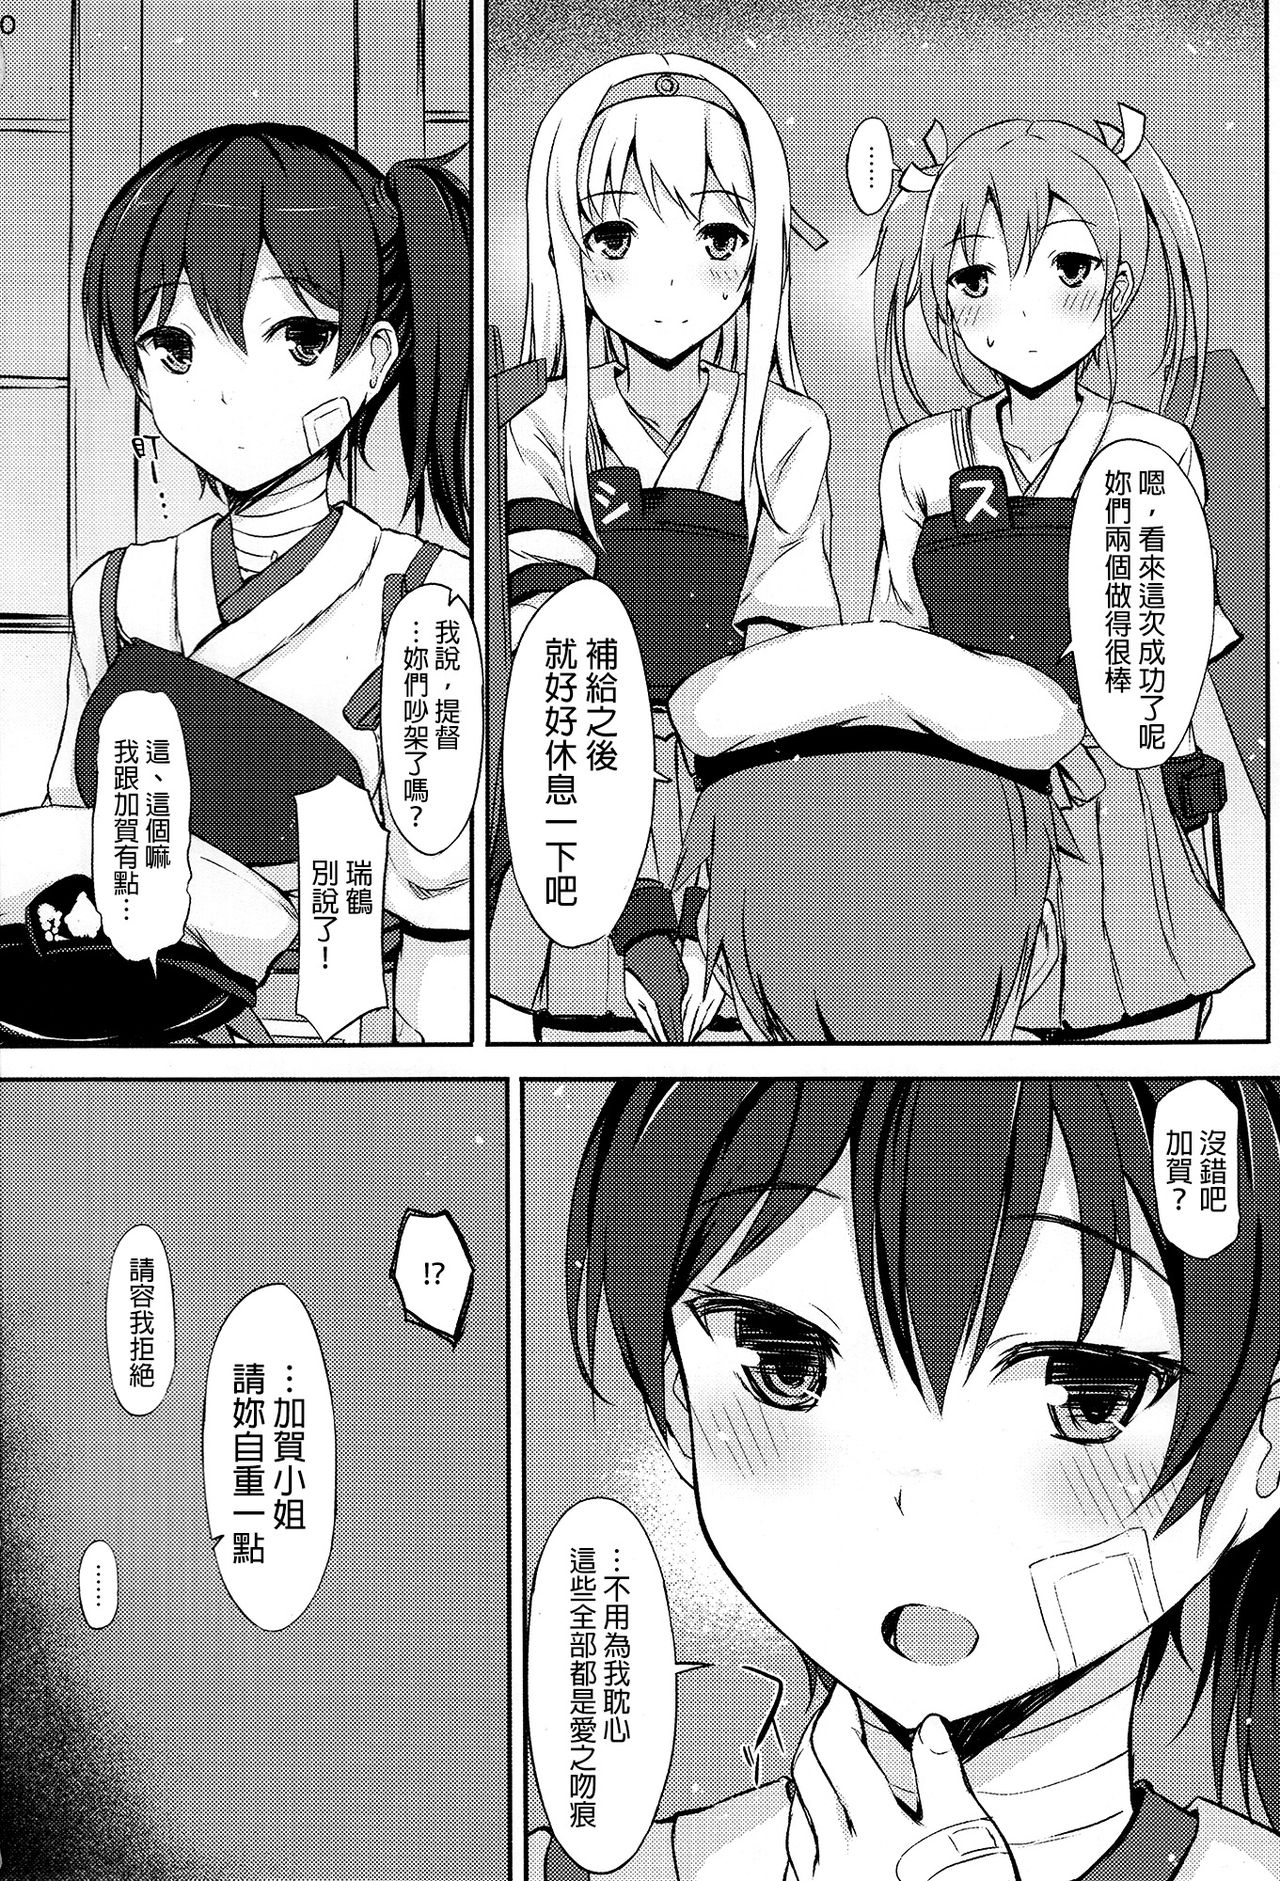 (COMIC1☆8) [INST (Interstellar)] YOU AND ME  (Kantai Collection -KanColle-) [Chinese] [final個人漢化] (COMIC1☆8) [INST (Interstellar)] YOU AND ME (艦隊これくしょん-艦これ-) [中文翻譯]